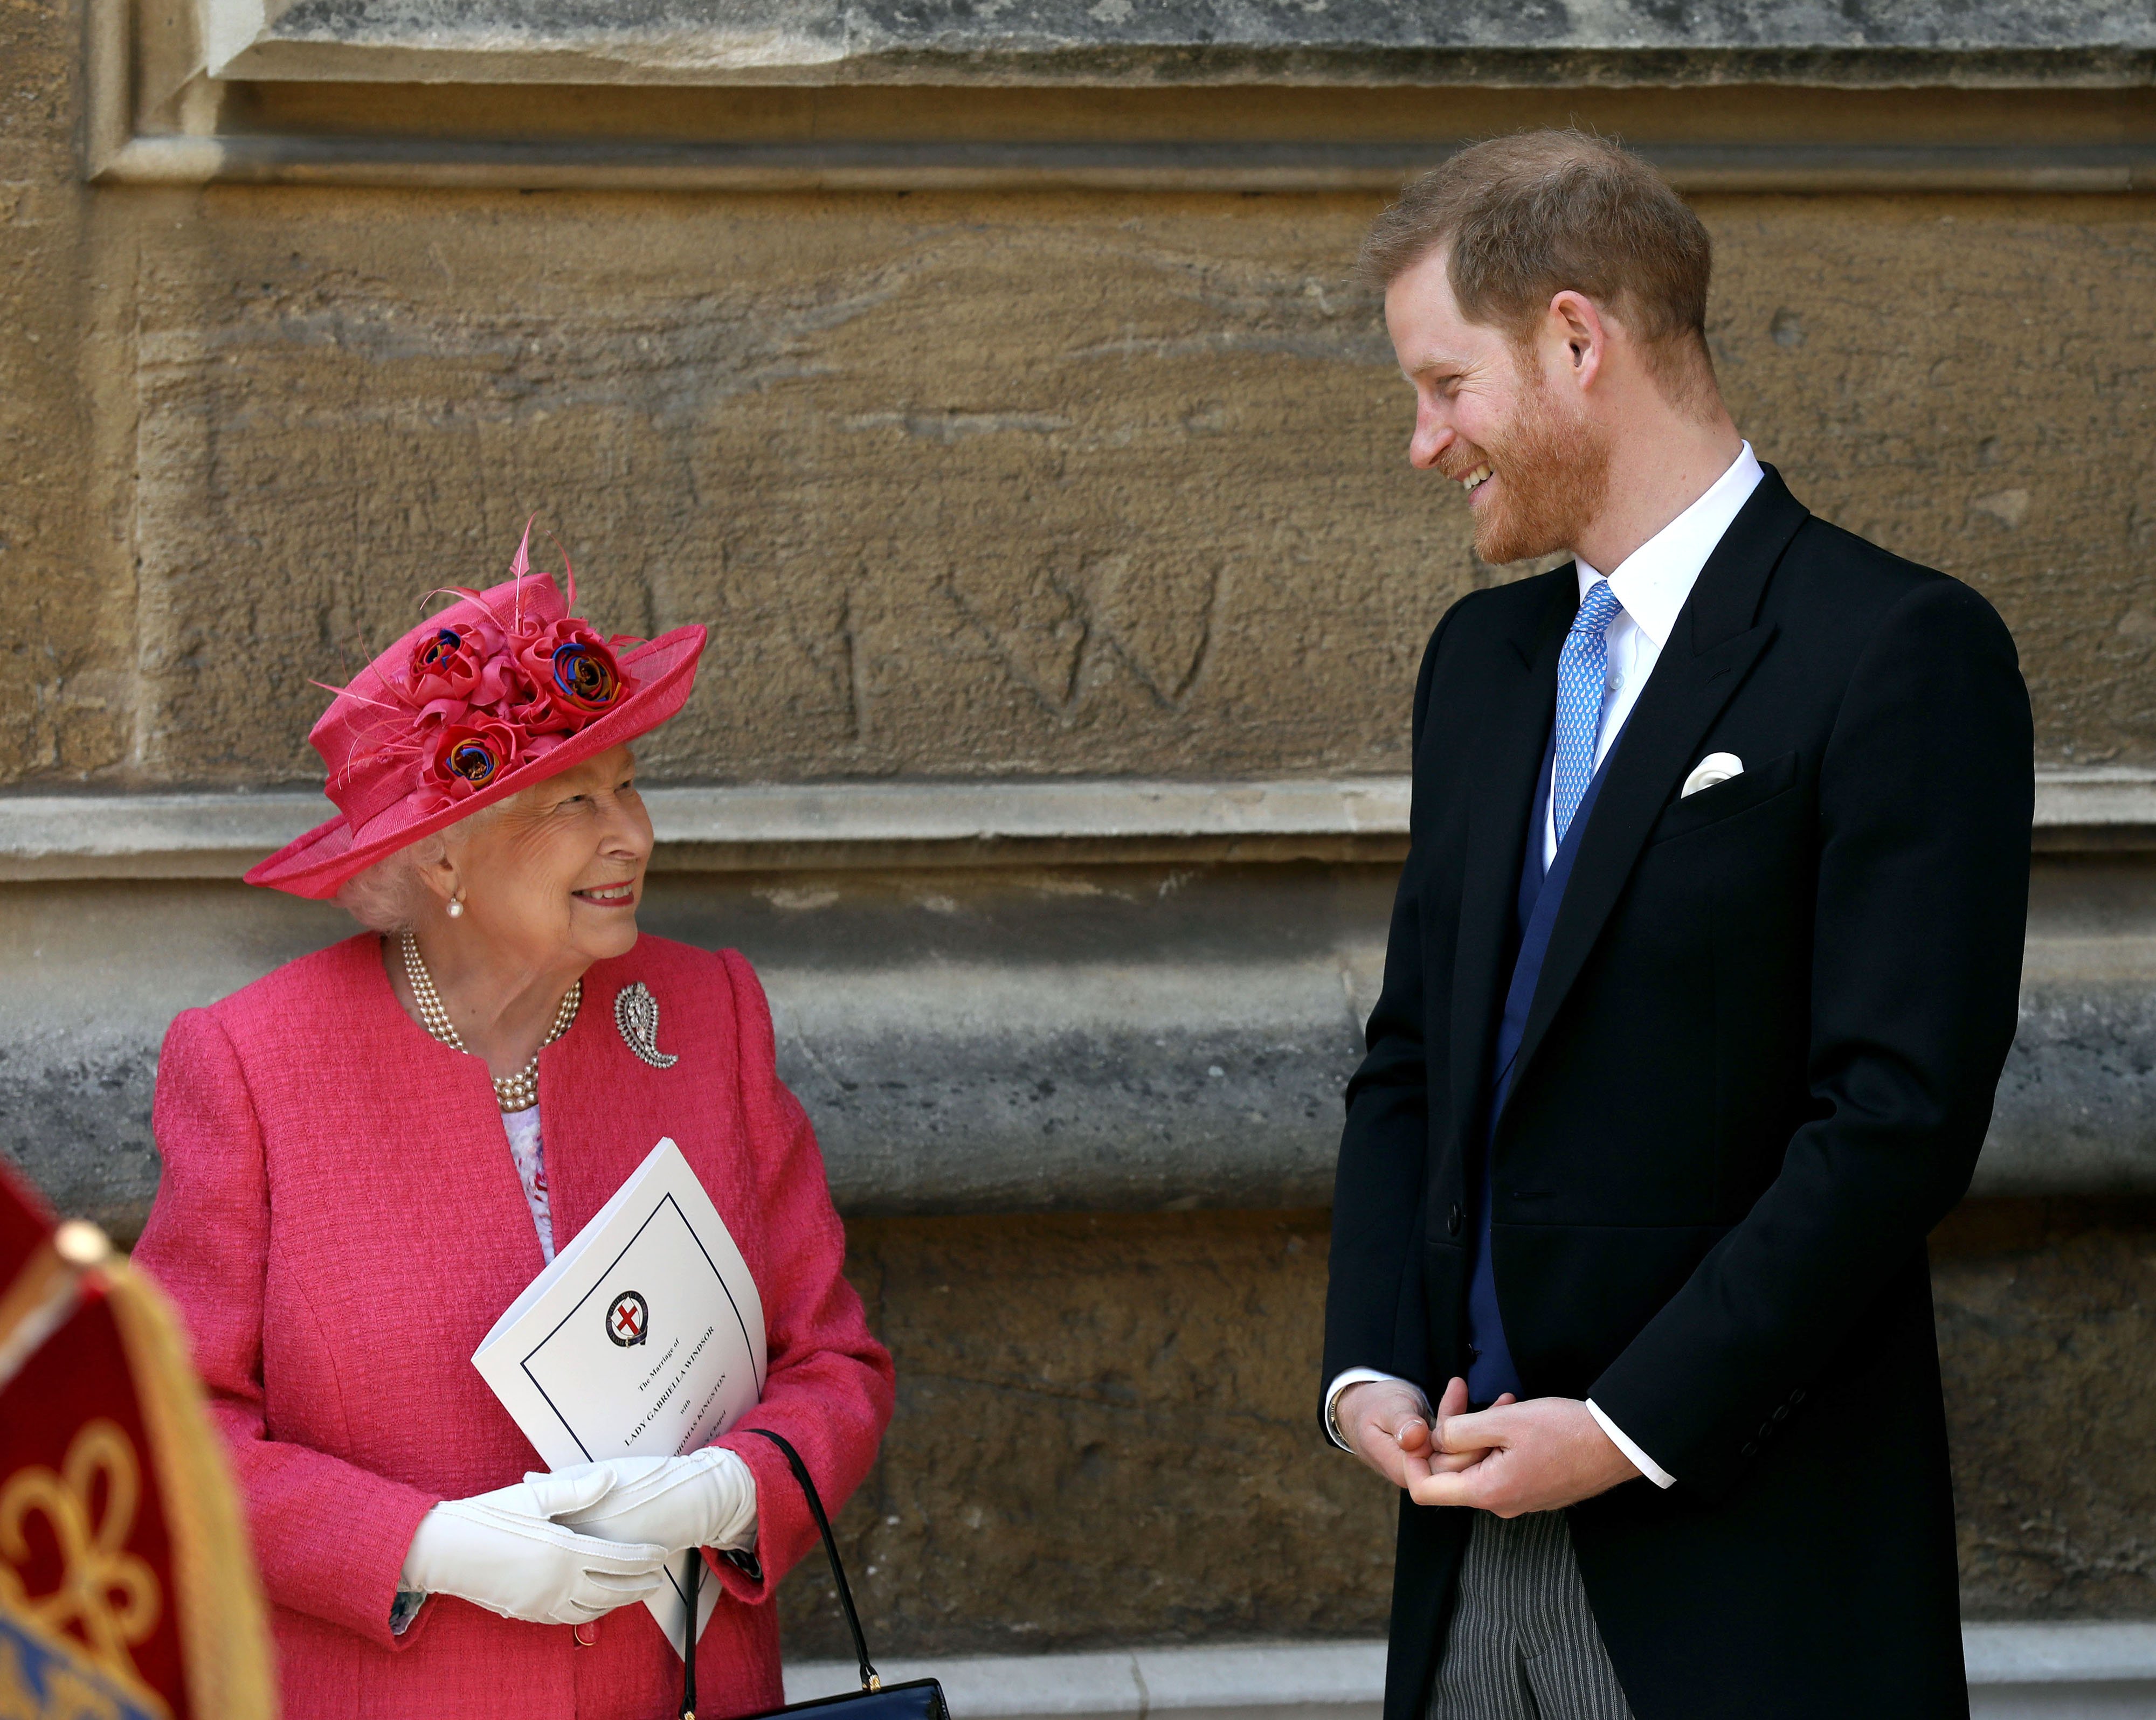 Queen Elizabeth II speaking with grandson Prince Harry, Duke of Sussex outside St George's Chapel, Windsor Castle on May 18, 2019 in Windsor, England. / Source: Getty Images